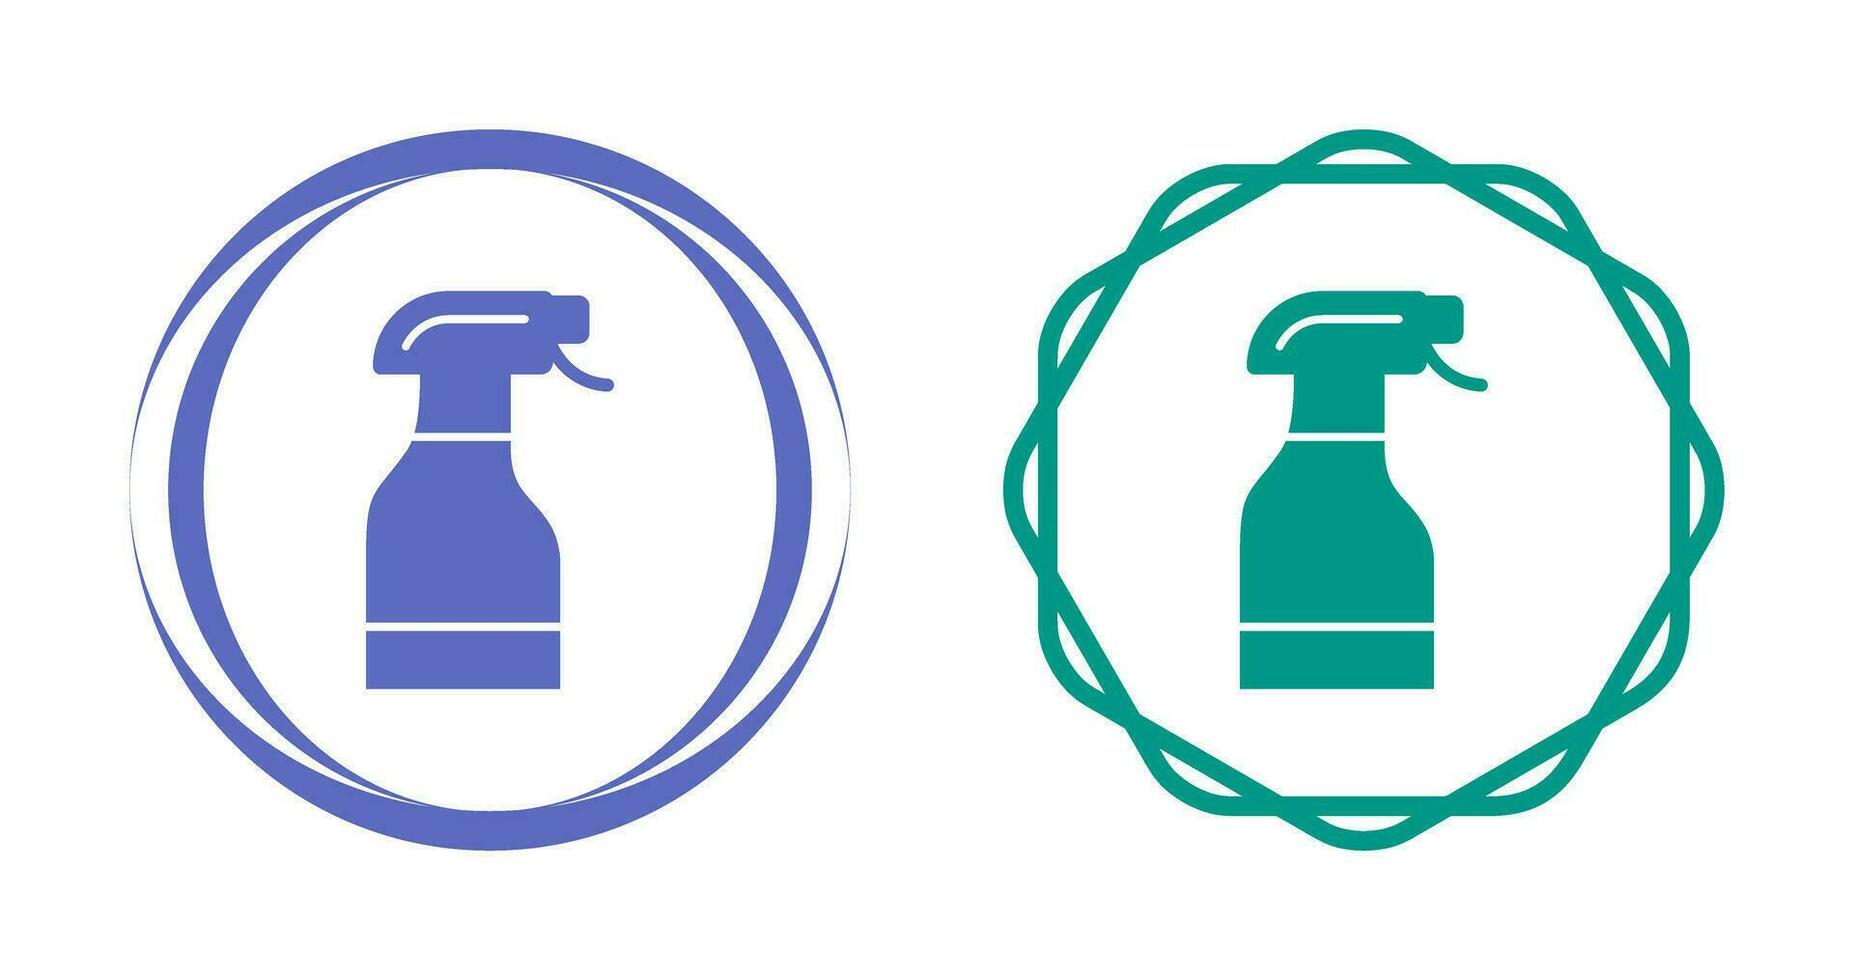 Cleaning Spray Vector Icon